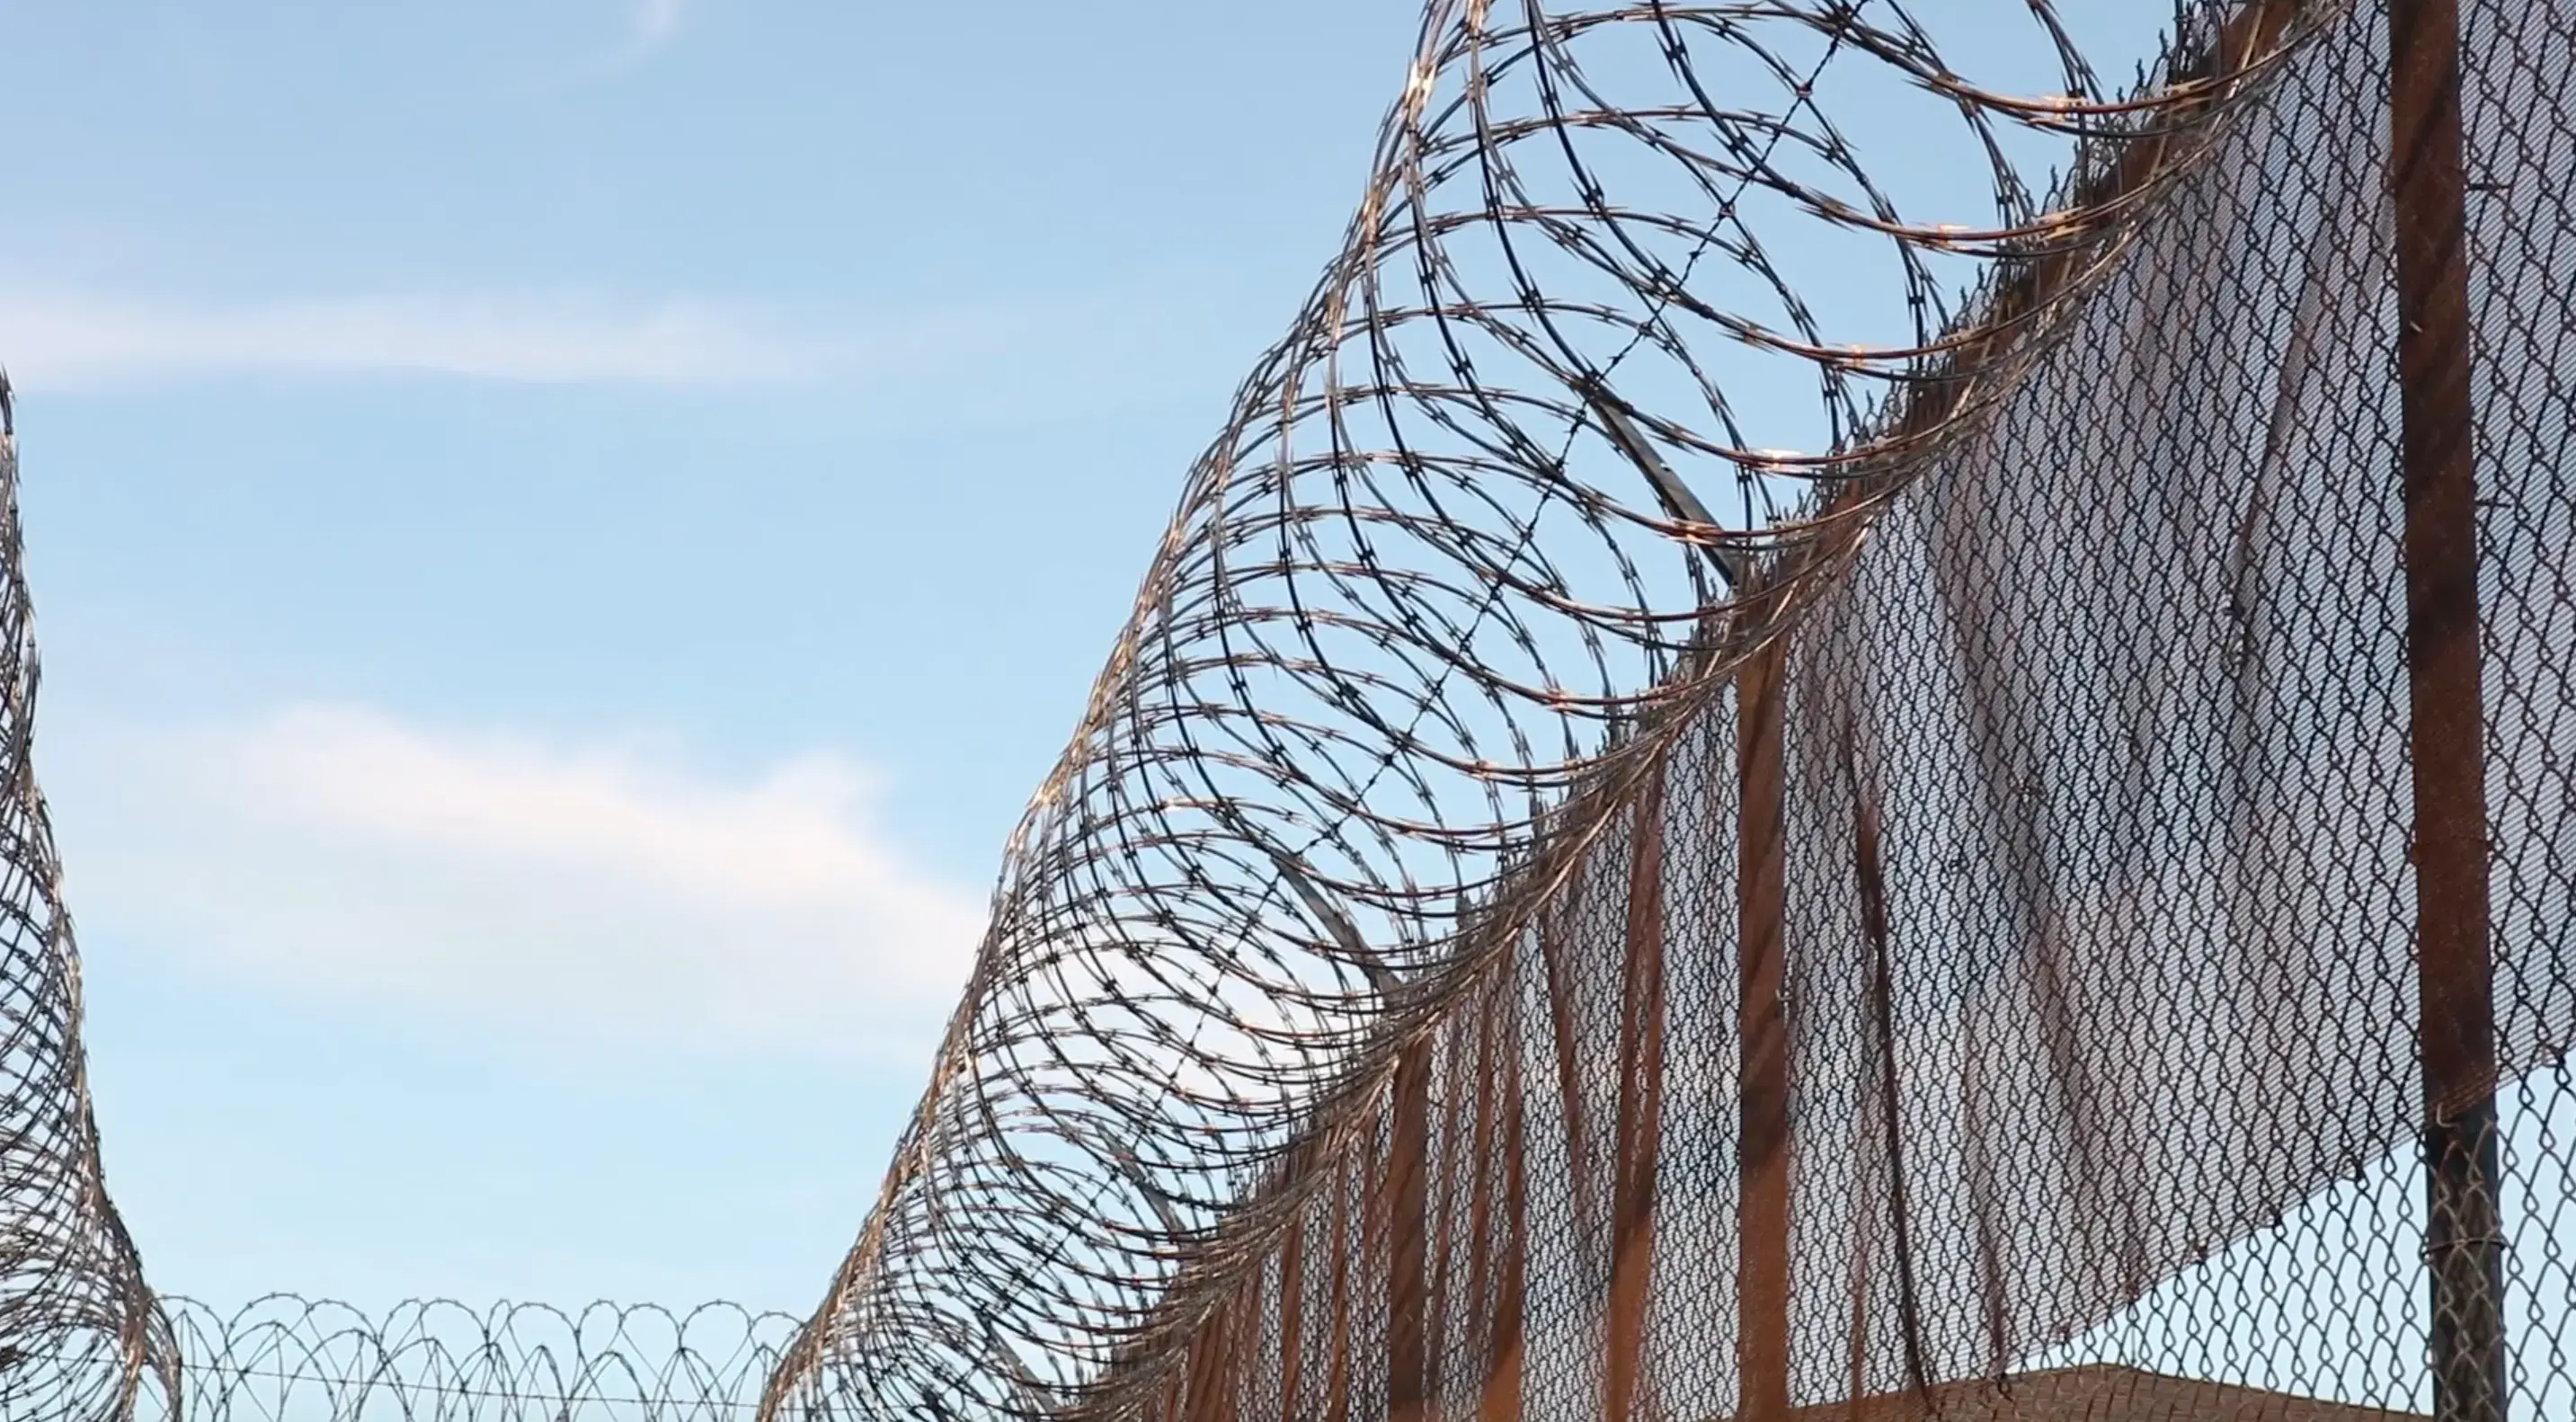 A large fence with razor wire across the top